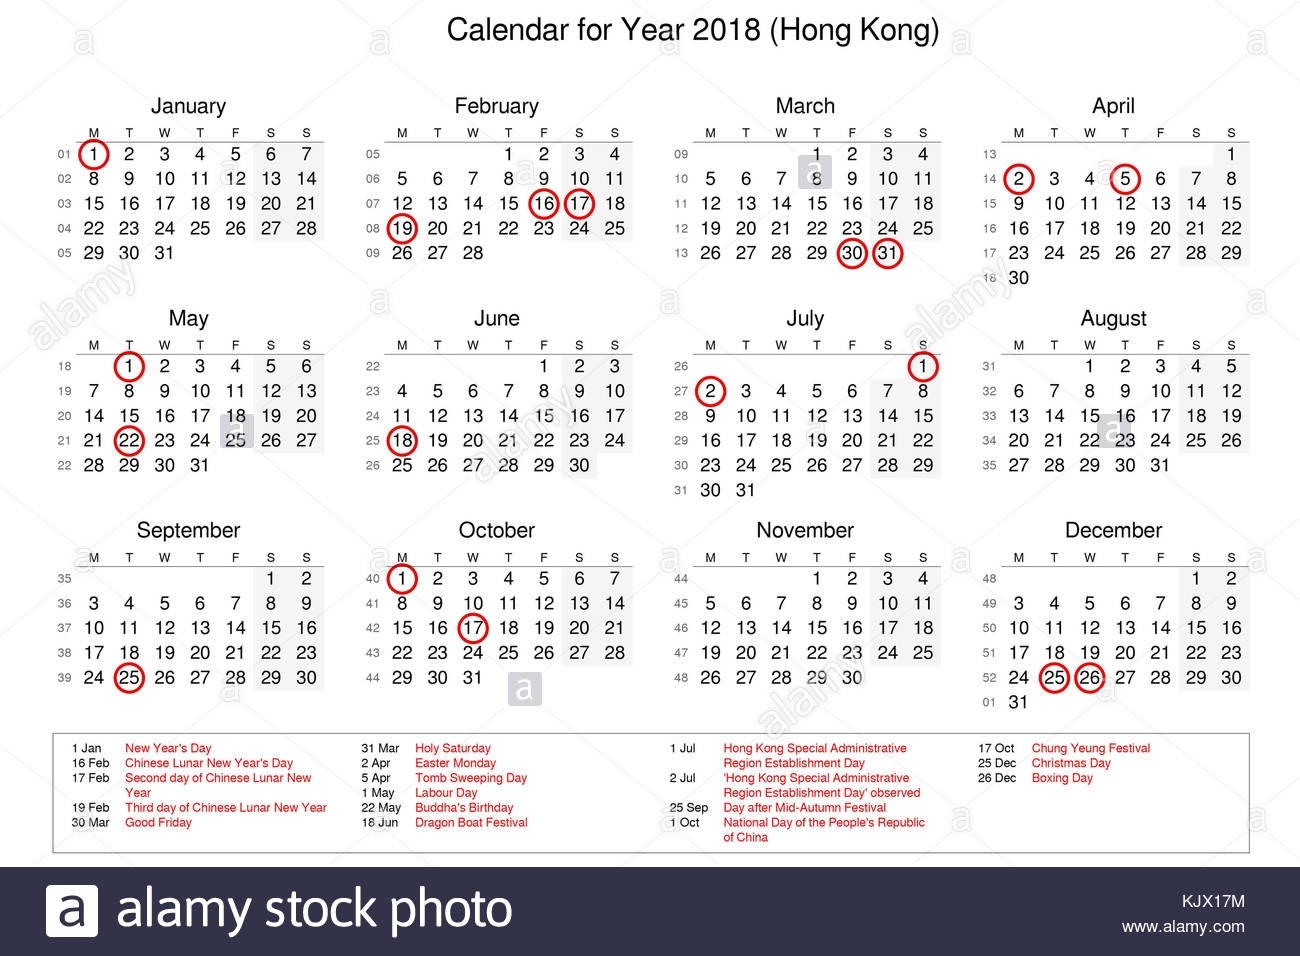 Calendar Of Year 2018 With Public Holidays And Bank Holidays